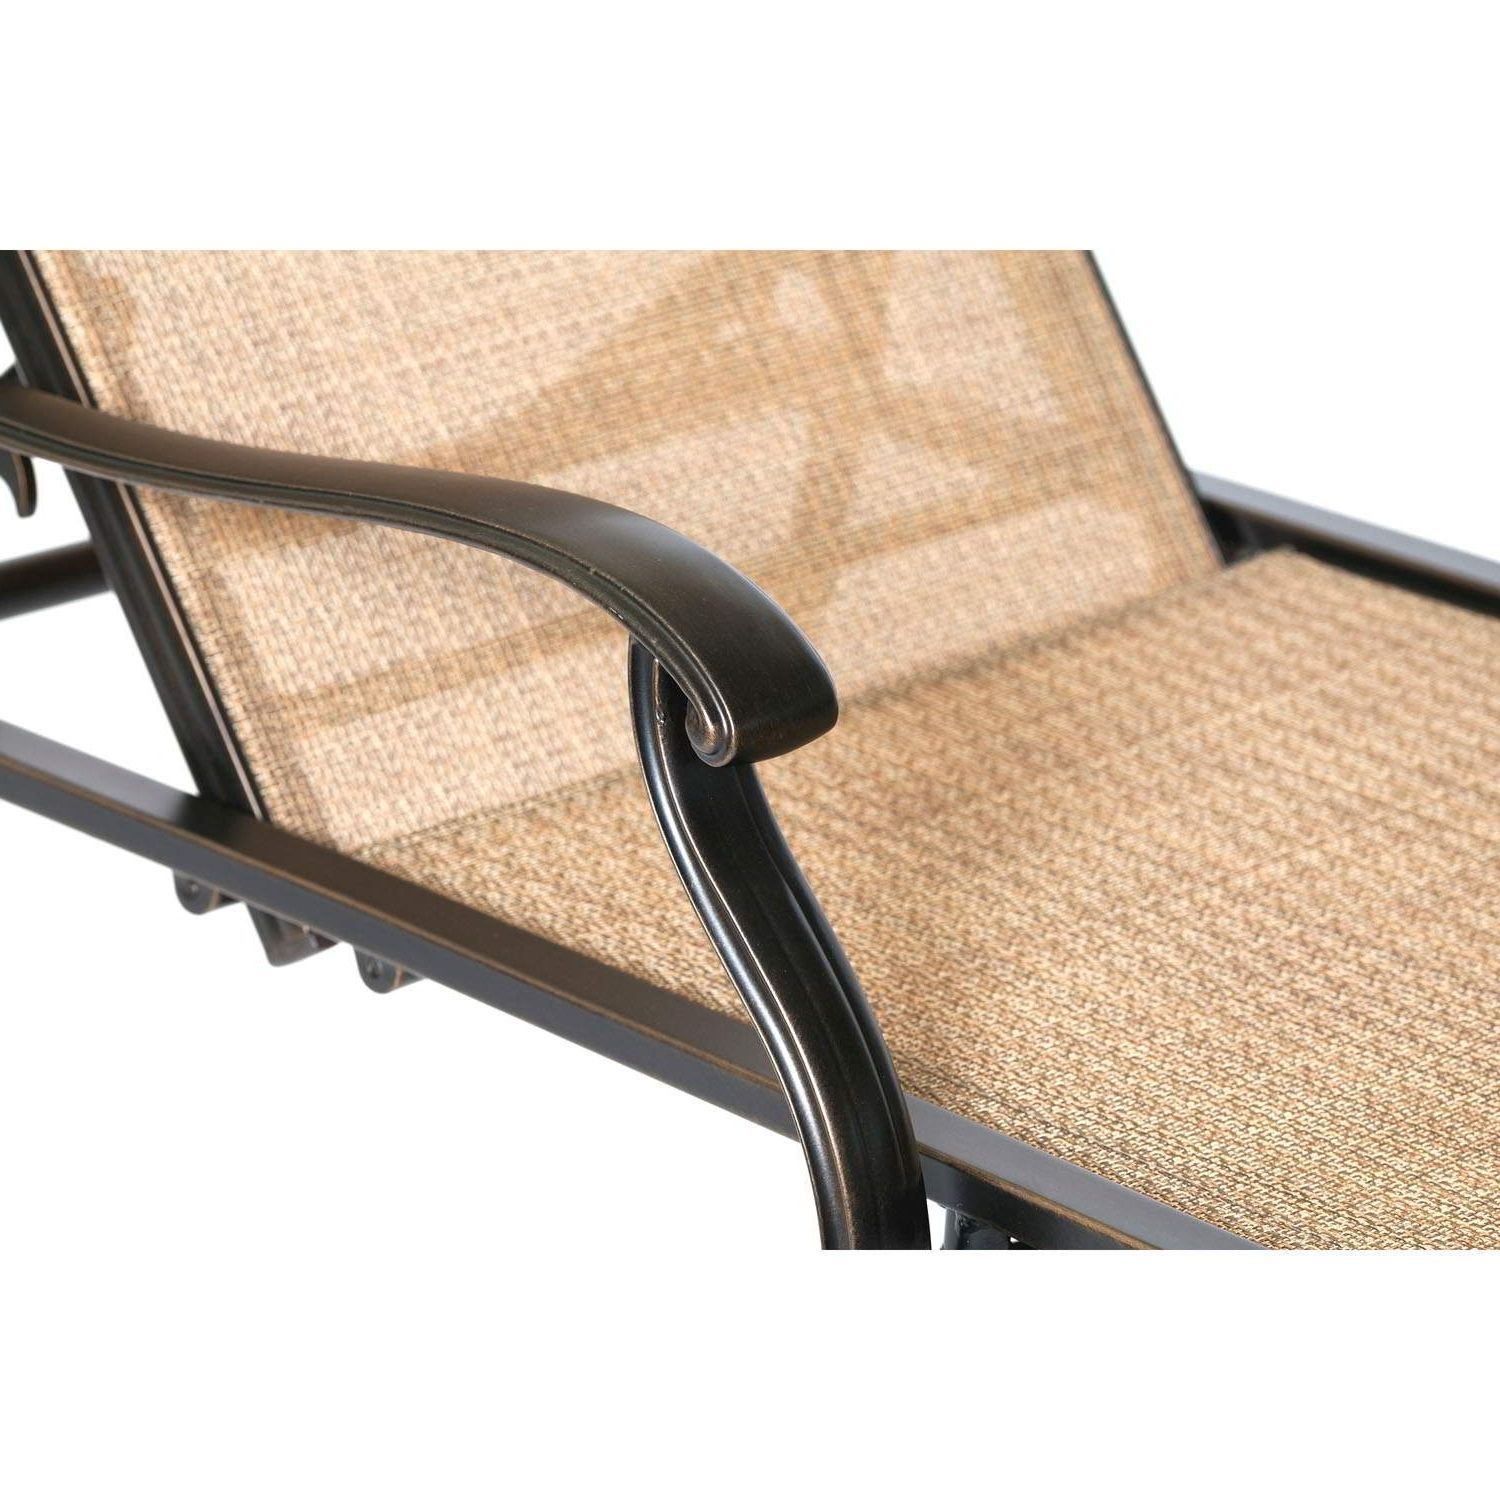 Chaise Lounge Sling Chairs Inside Most Recent Monaco Sling Back Chaise Lounge Chair – Monchs (View 10 of 15)